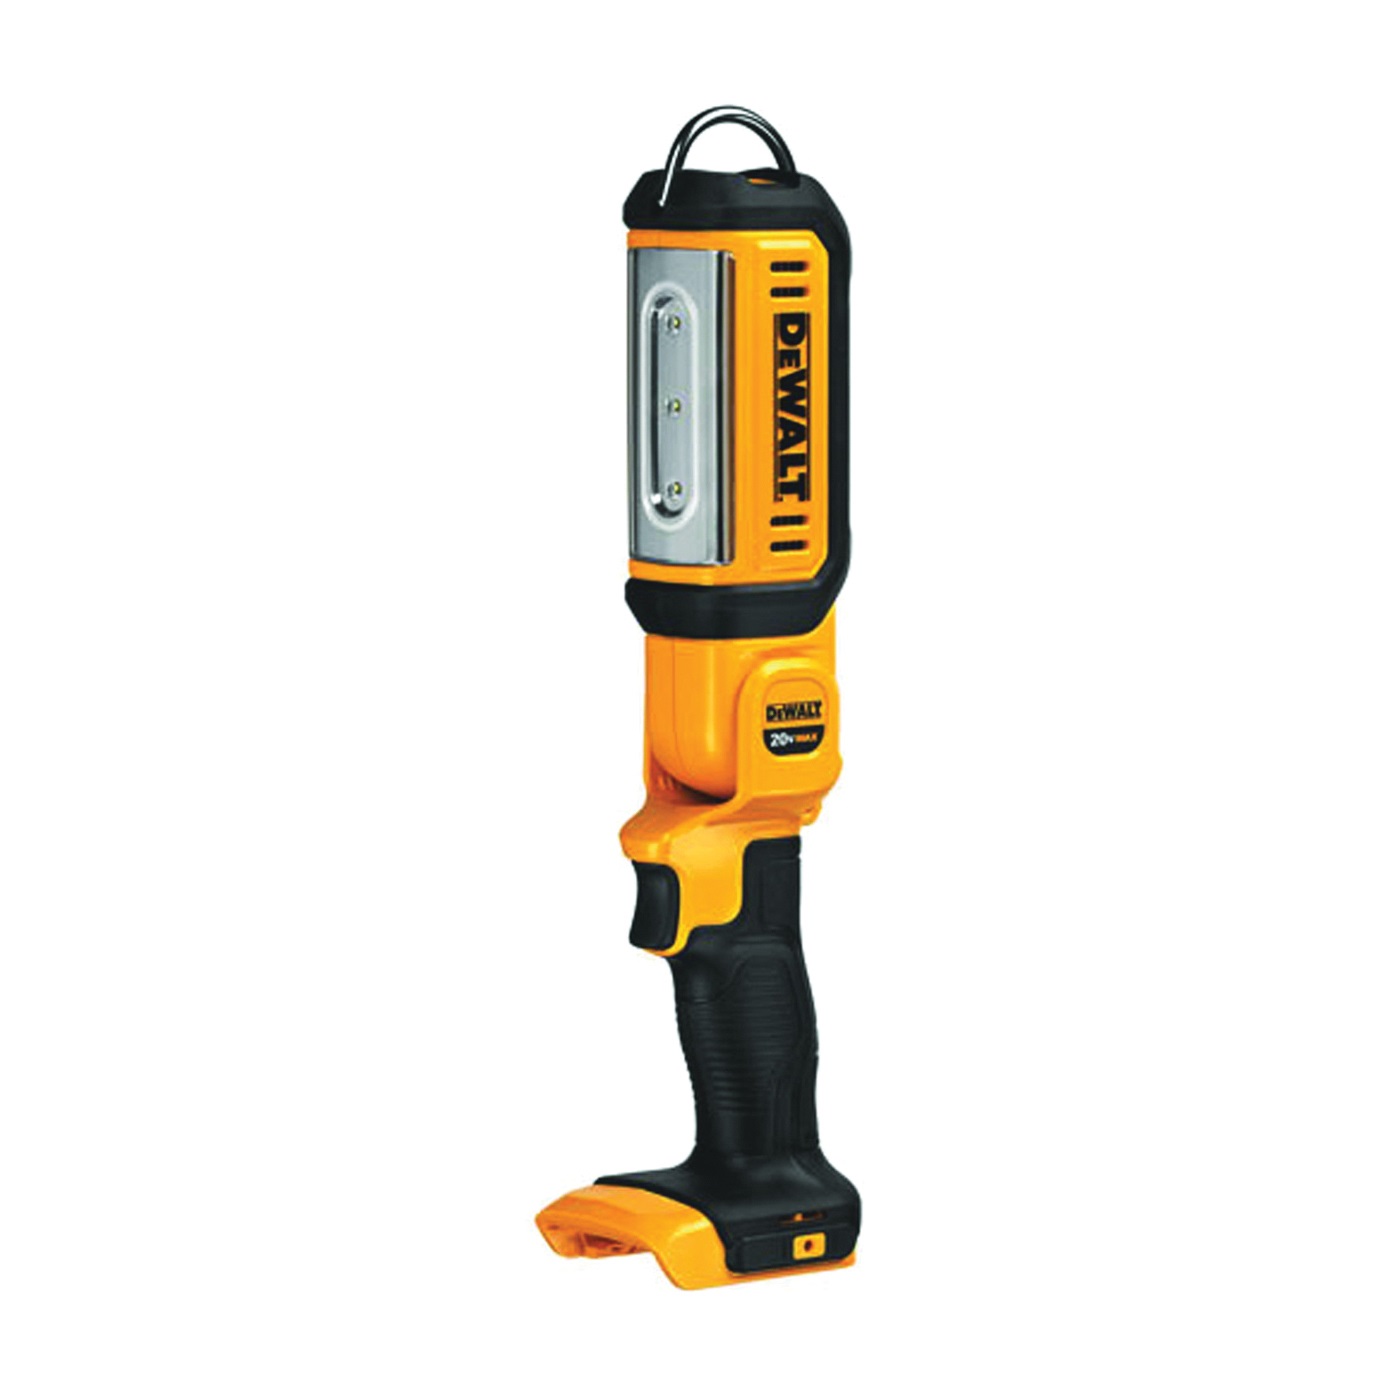 DeWALT DCL050 Hand Held Area Light, LED Lamp, 101 to 500 Lumens, 22 hr Run Time, Black/Yellow - 1